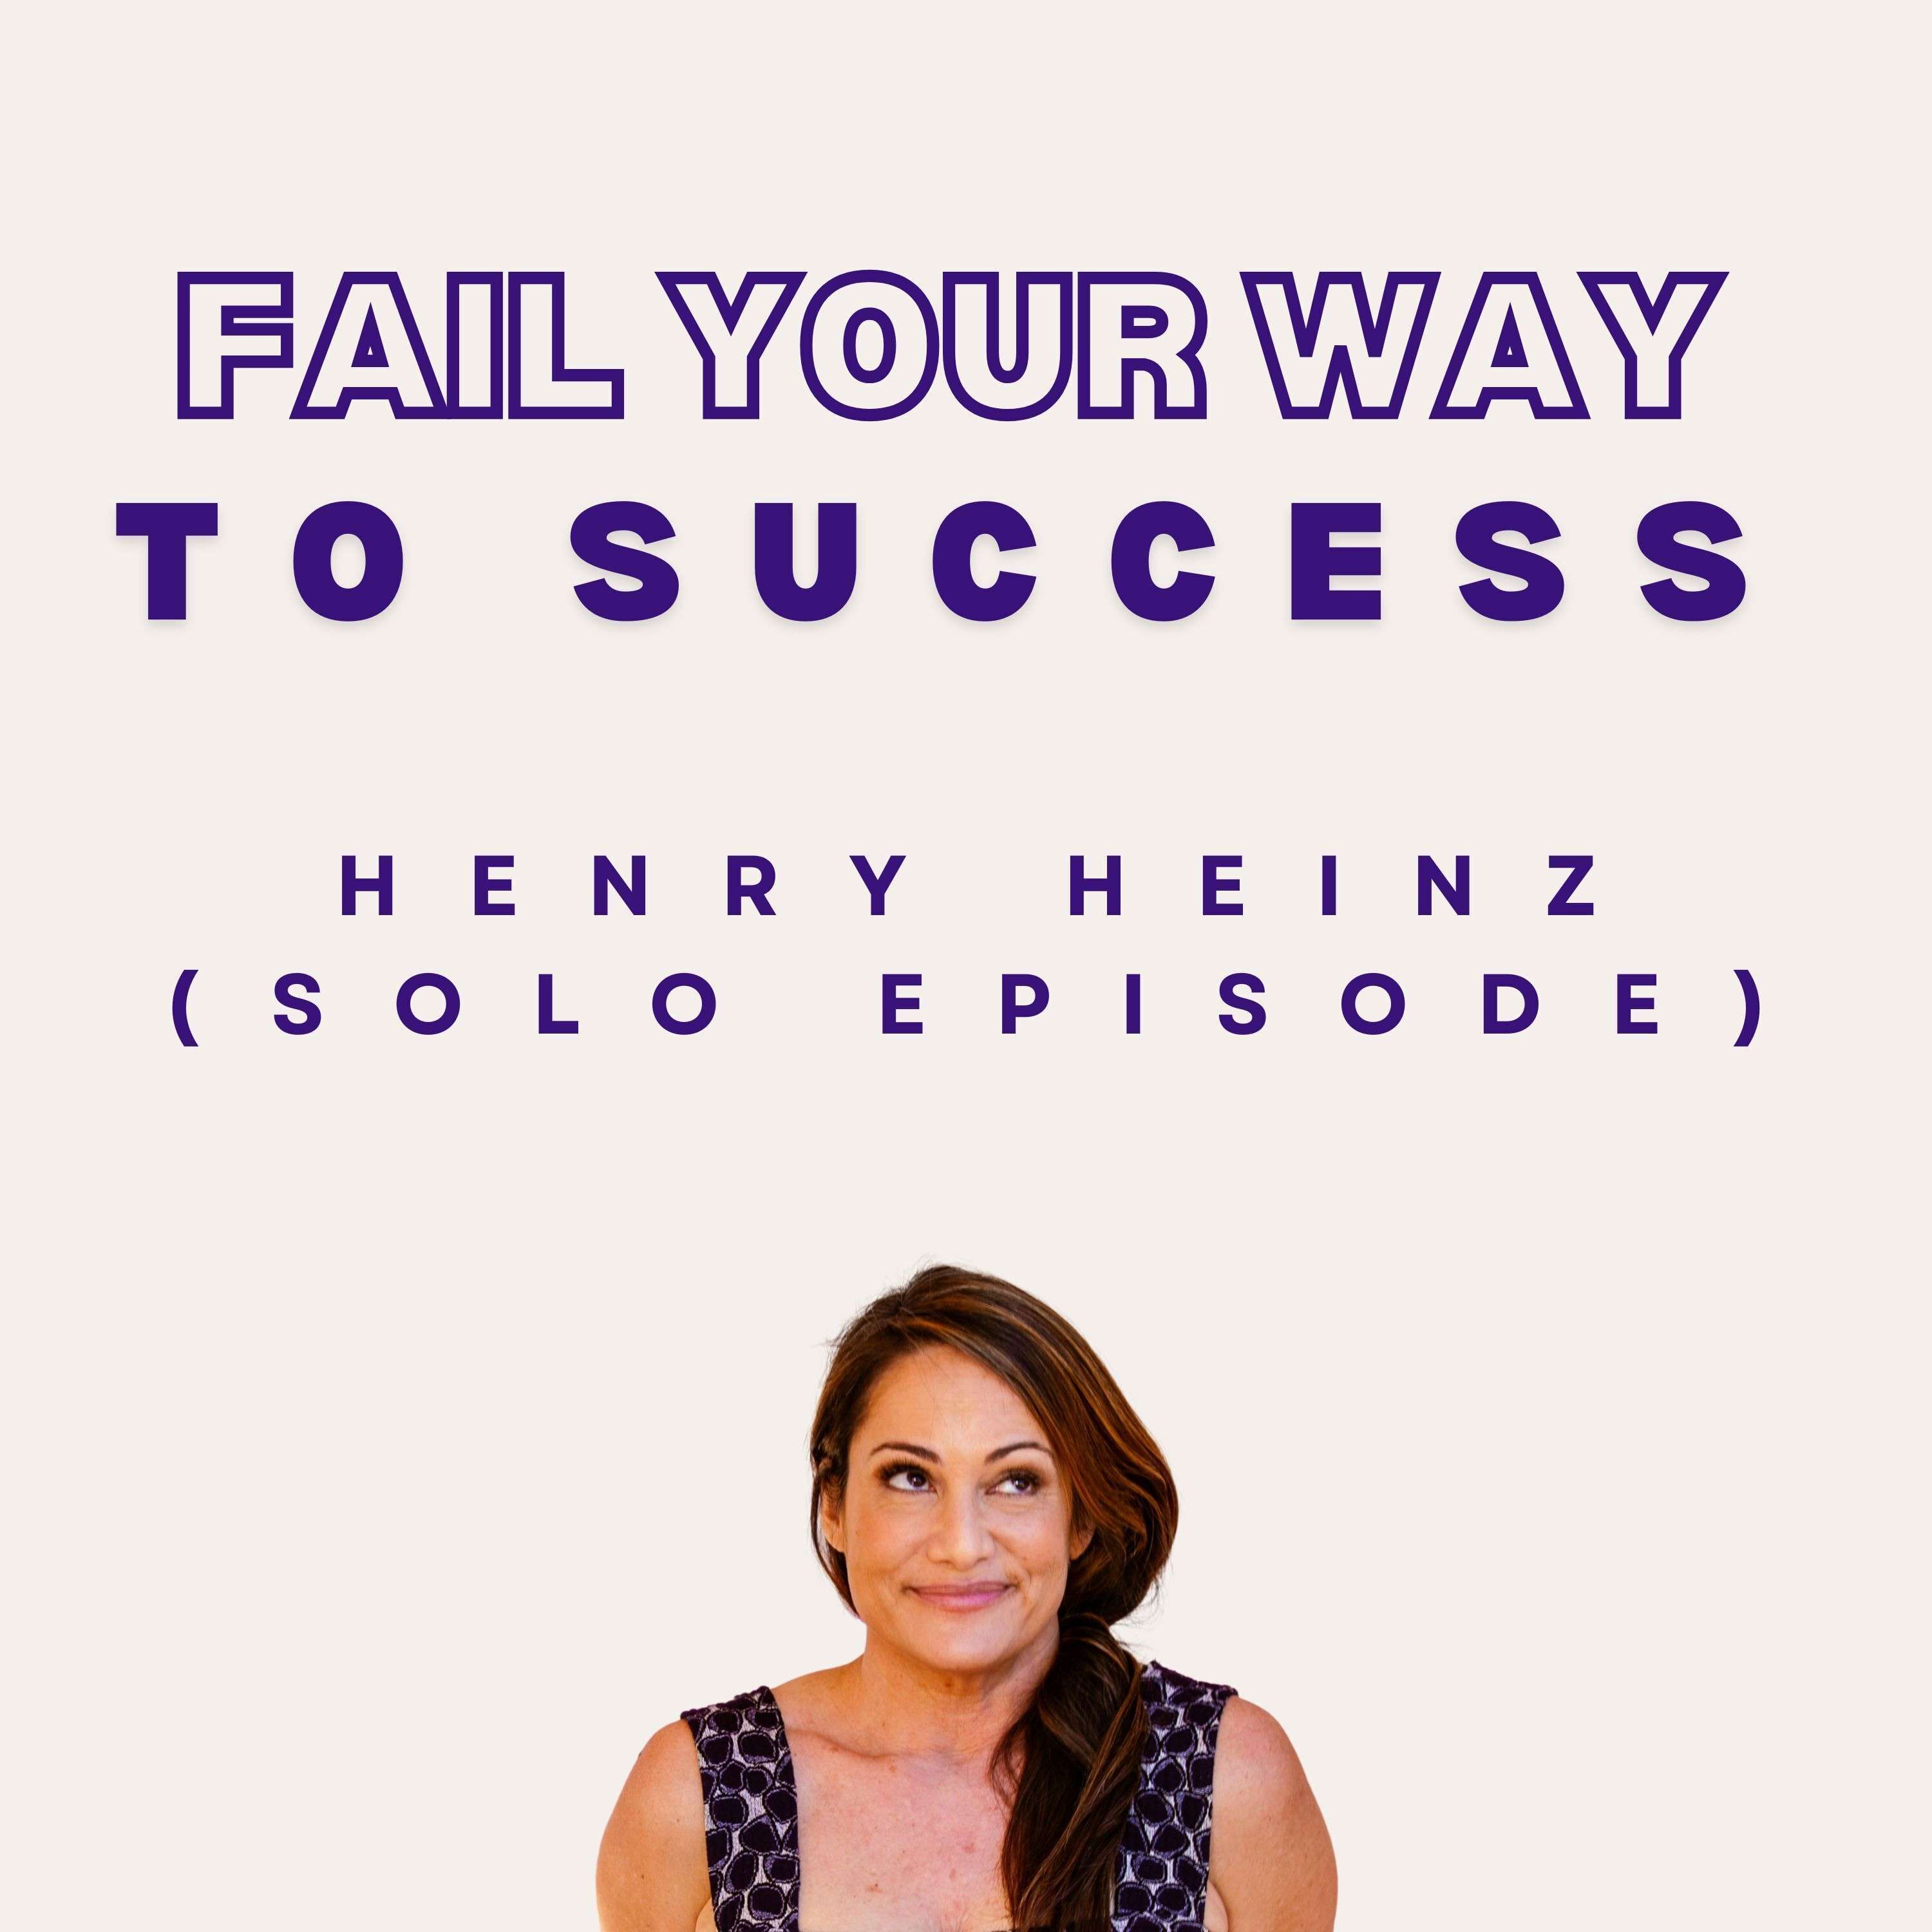 3. How Henry Heinz Went From Bankruptcy to Ketchup Mogul (Solo Episode)